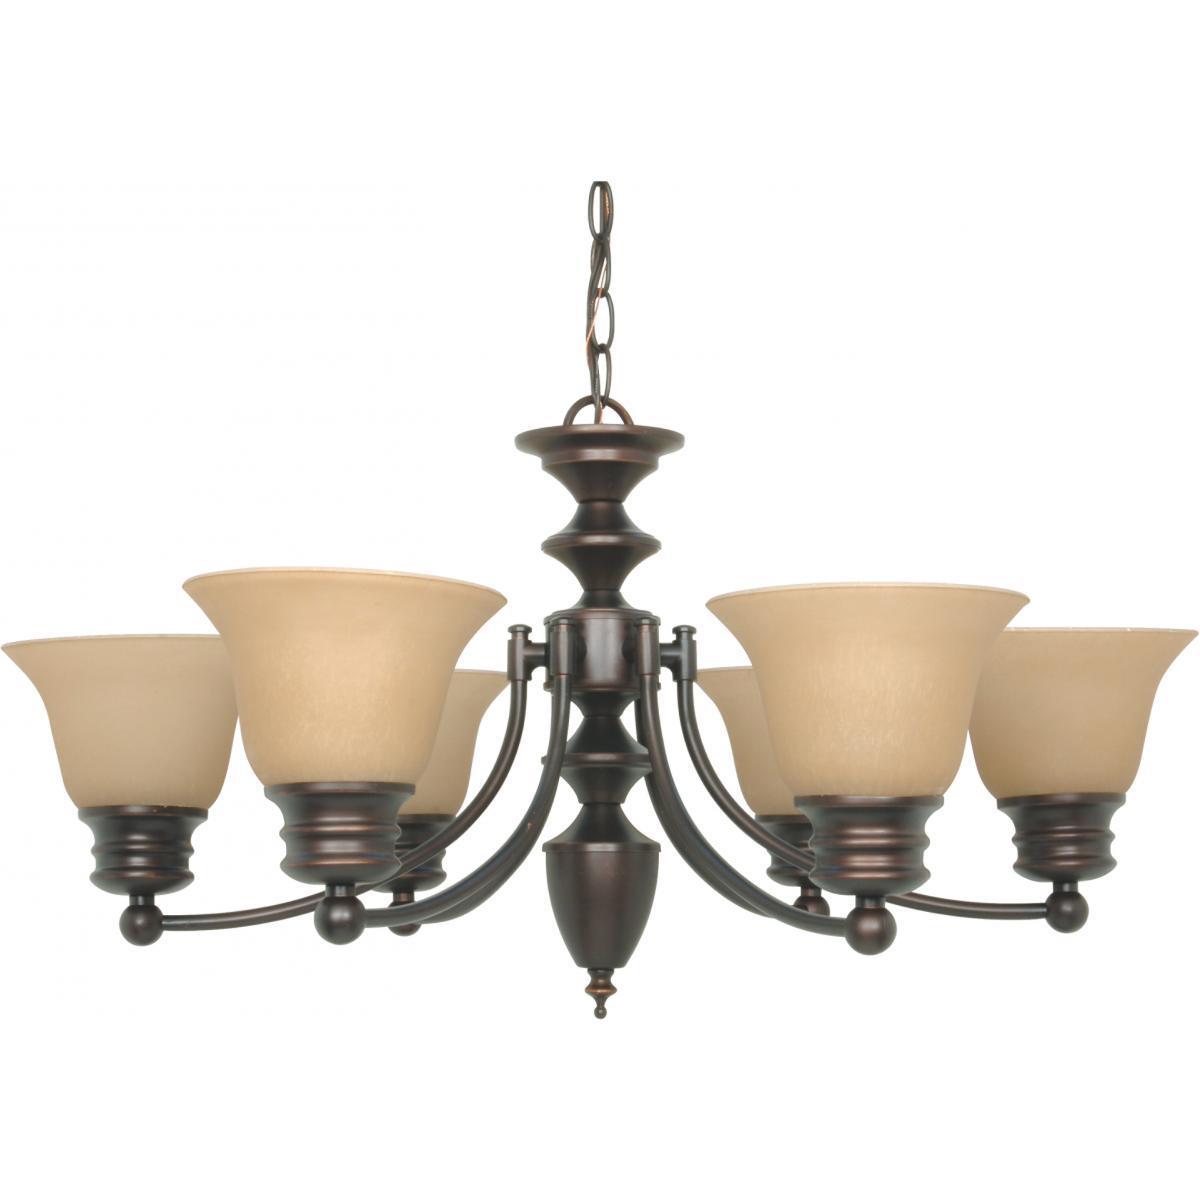 Empire 6 Arm Chandelier With Storm Glasses (730P6G) - The